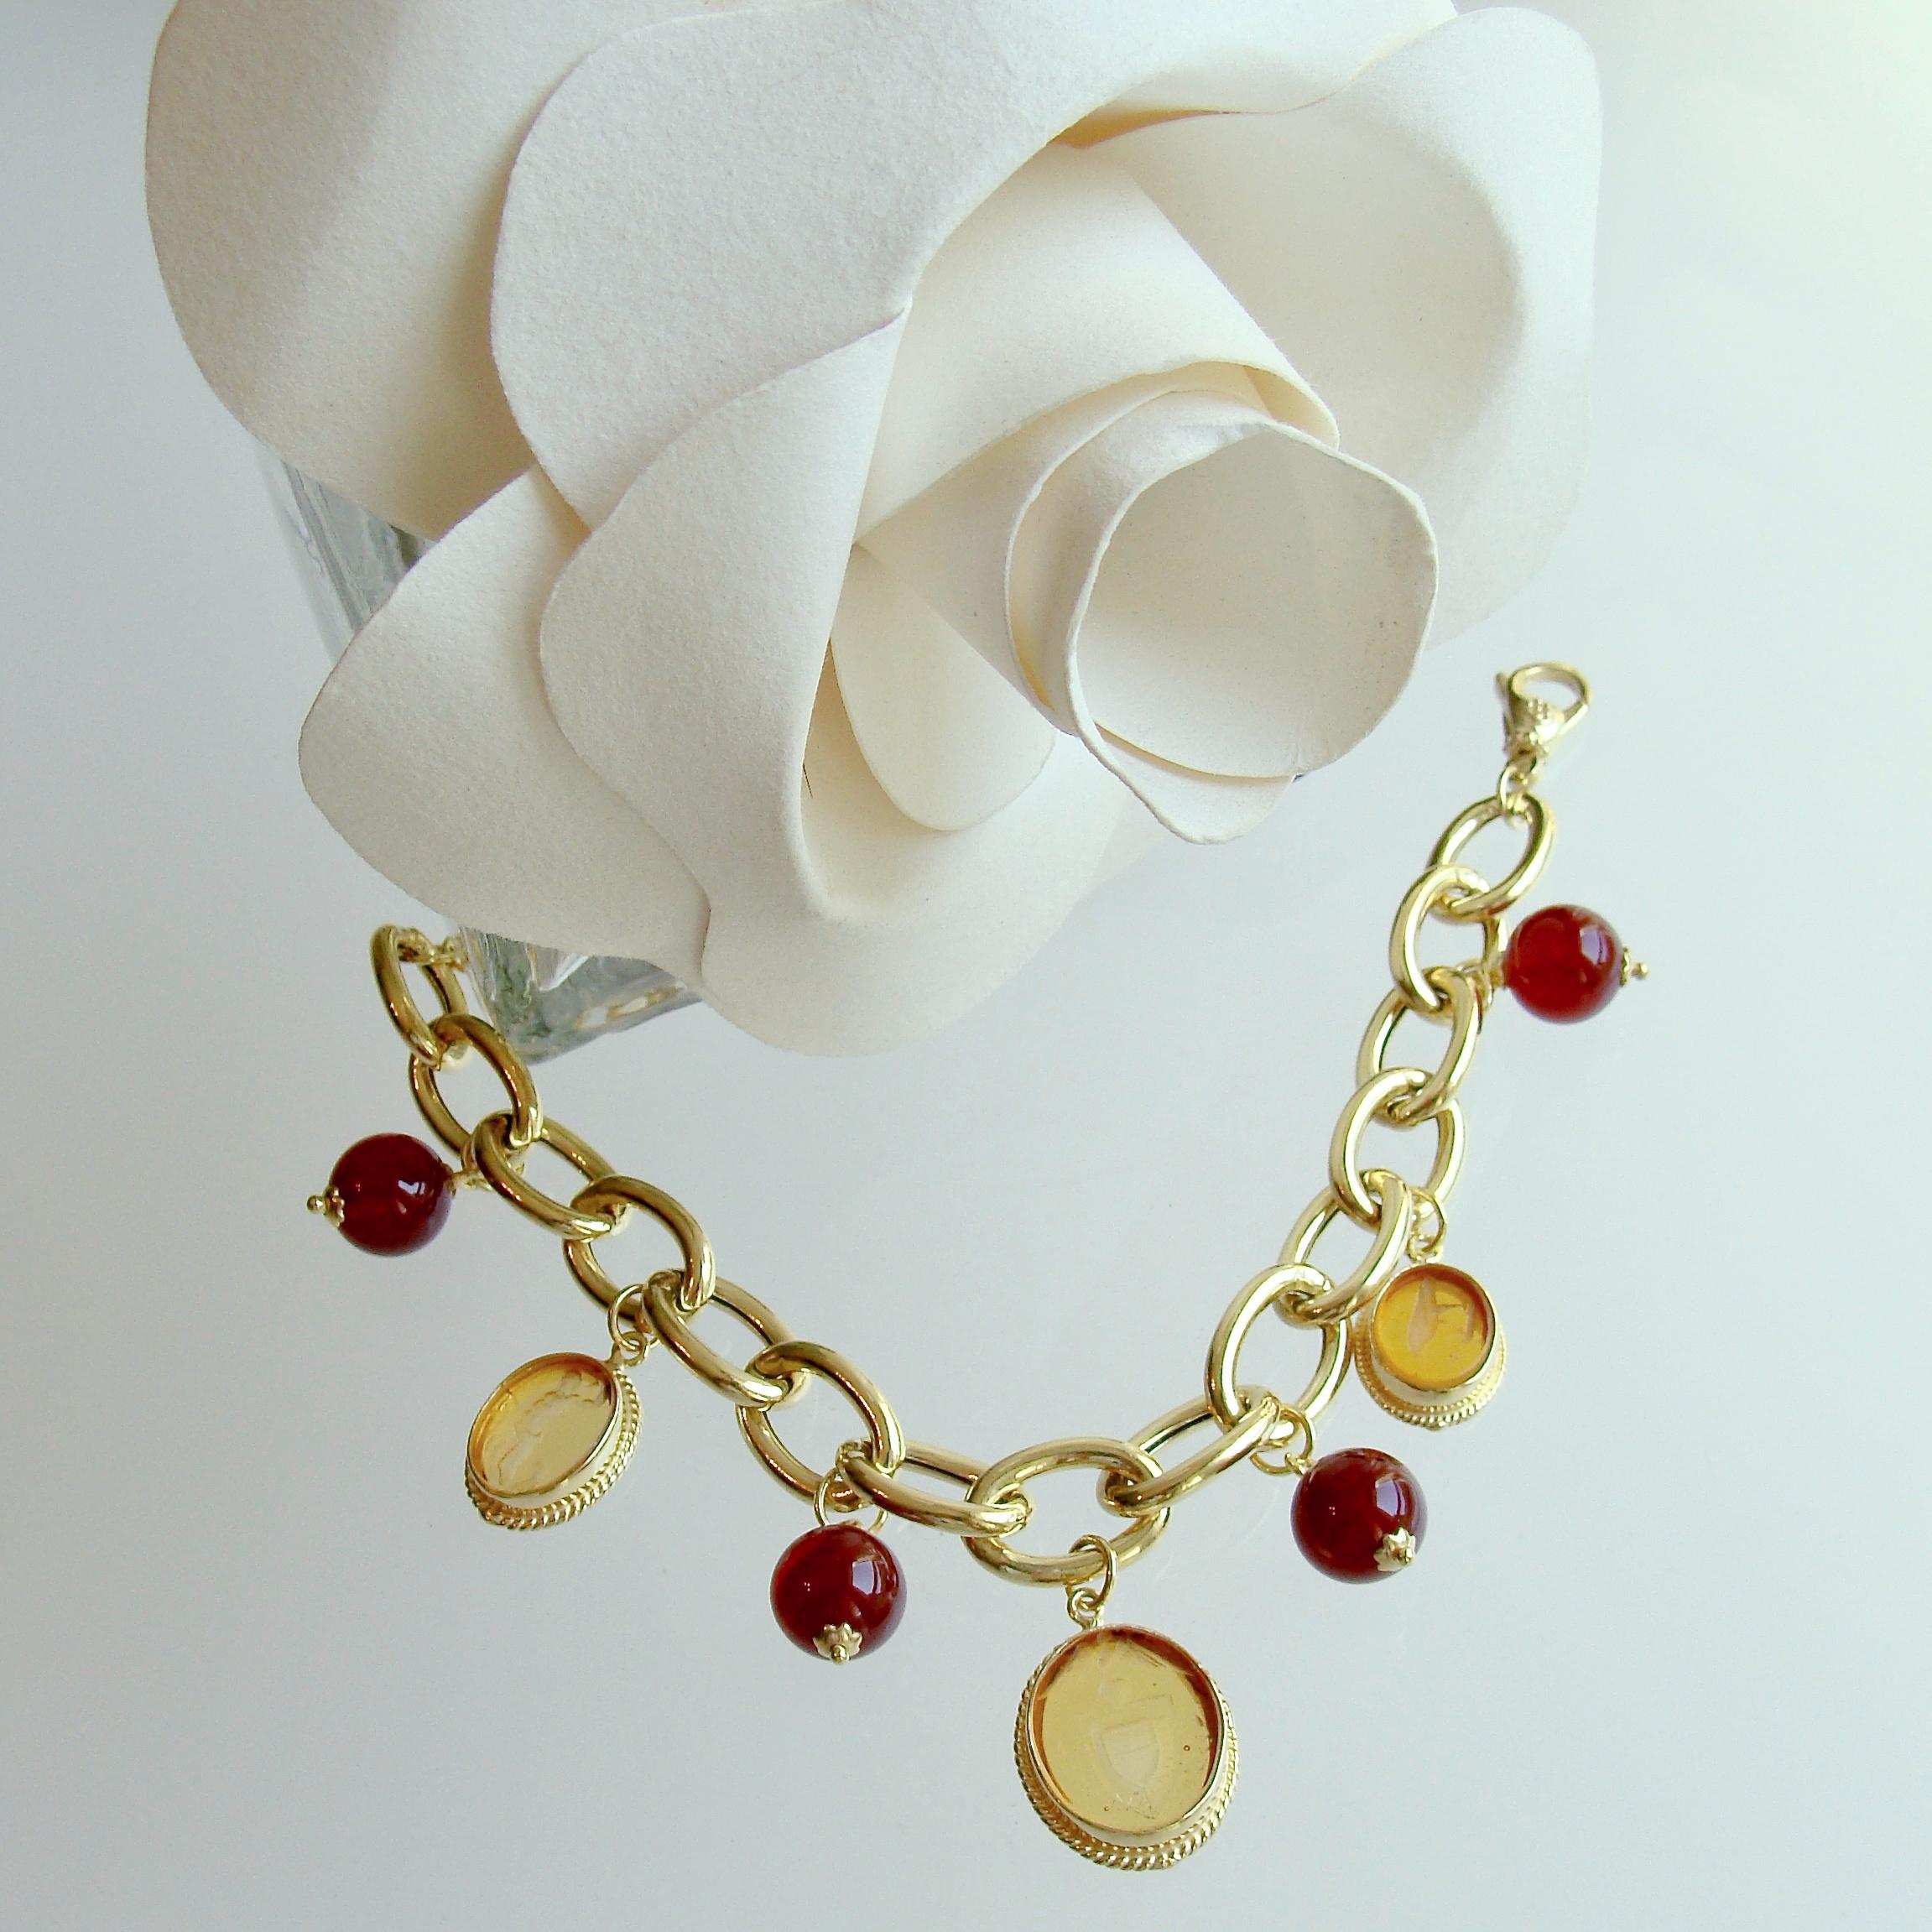 Three gold colored Venetian Glass Intaglios alternate with Carnelian beads to create this lovely “charm bracelet”.  The adjustable clasp allows the wearer to fit the bracelet to their desired position.  The root beer coloring of the Carnelian beads